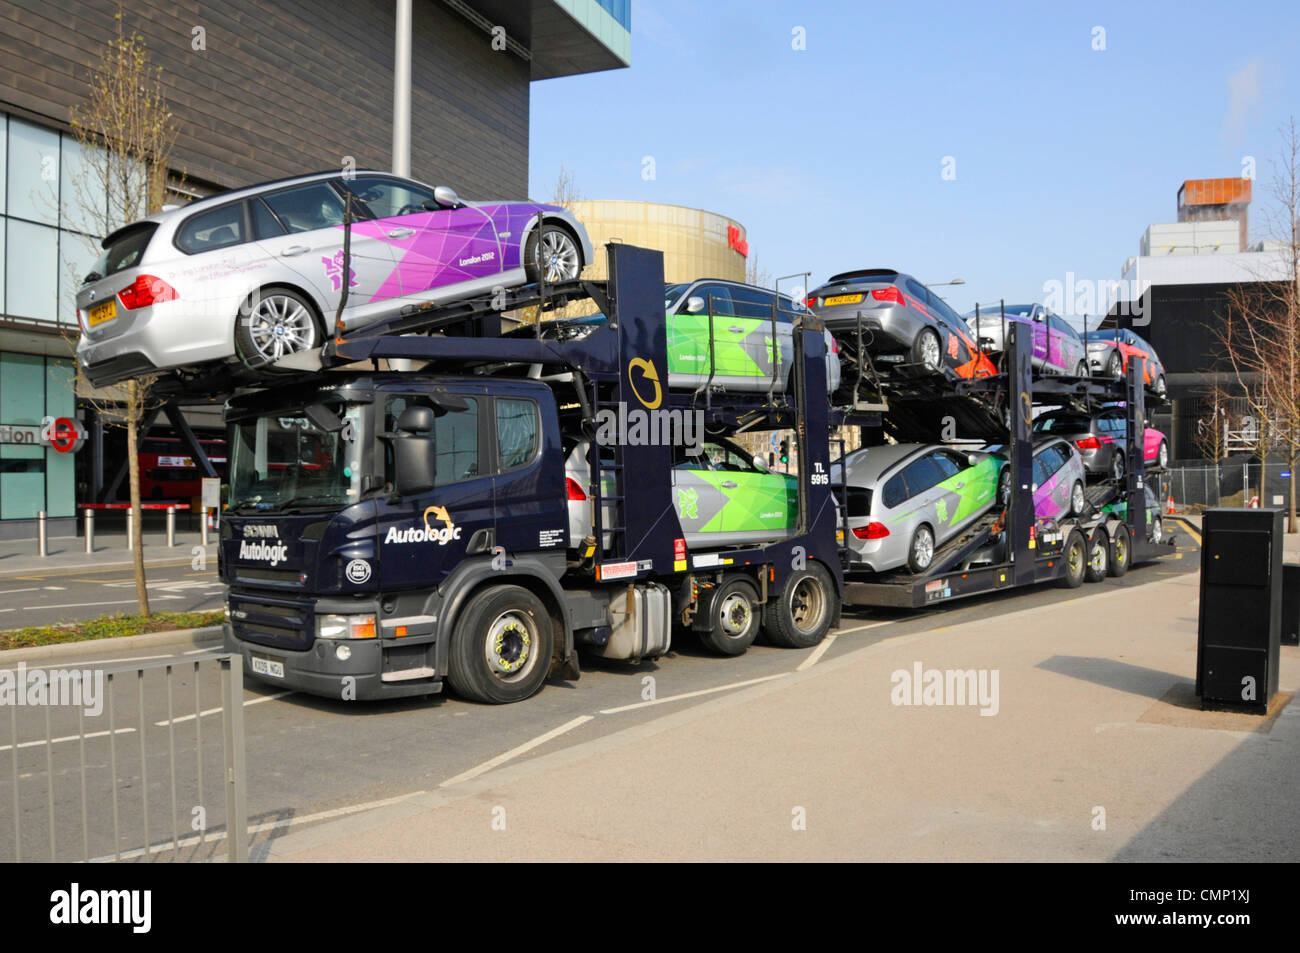 Autologic Car Transporter BMW cars painted in 2012 Olympic Paralympic games colours for use by officials & others at Stratford East London England UK Stock Photo